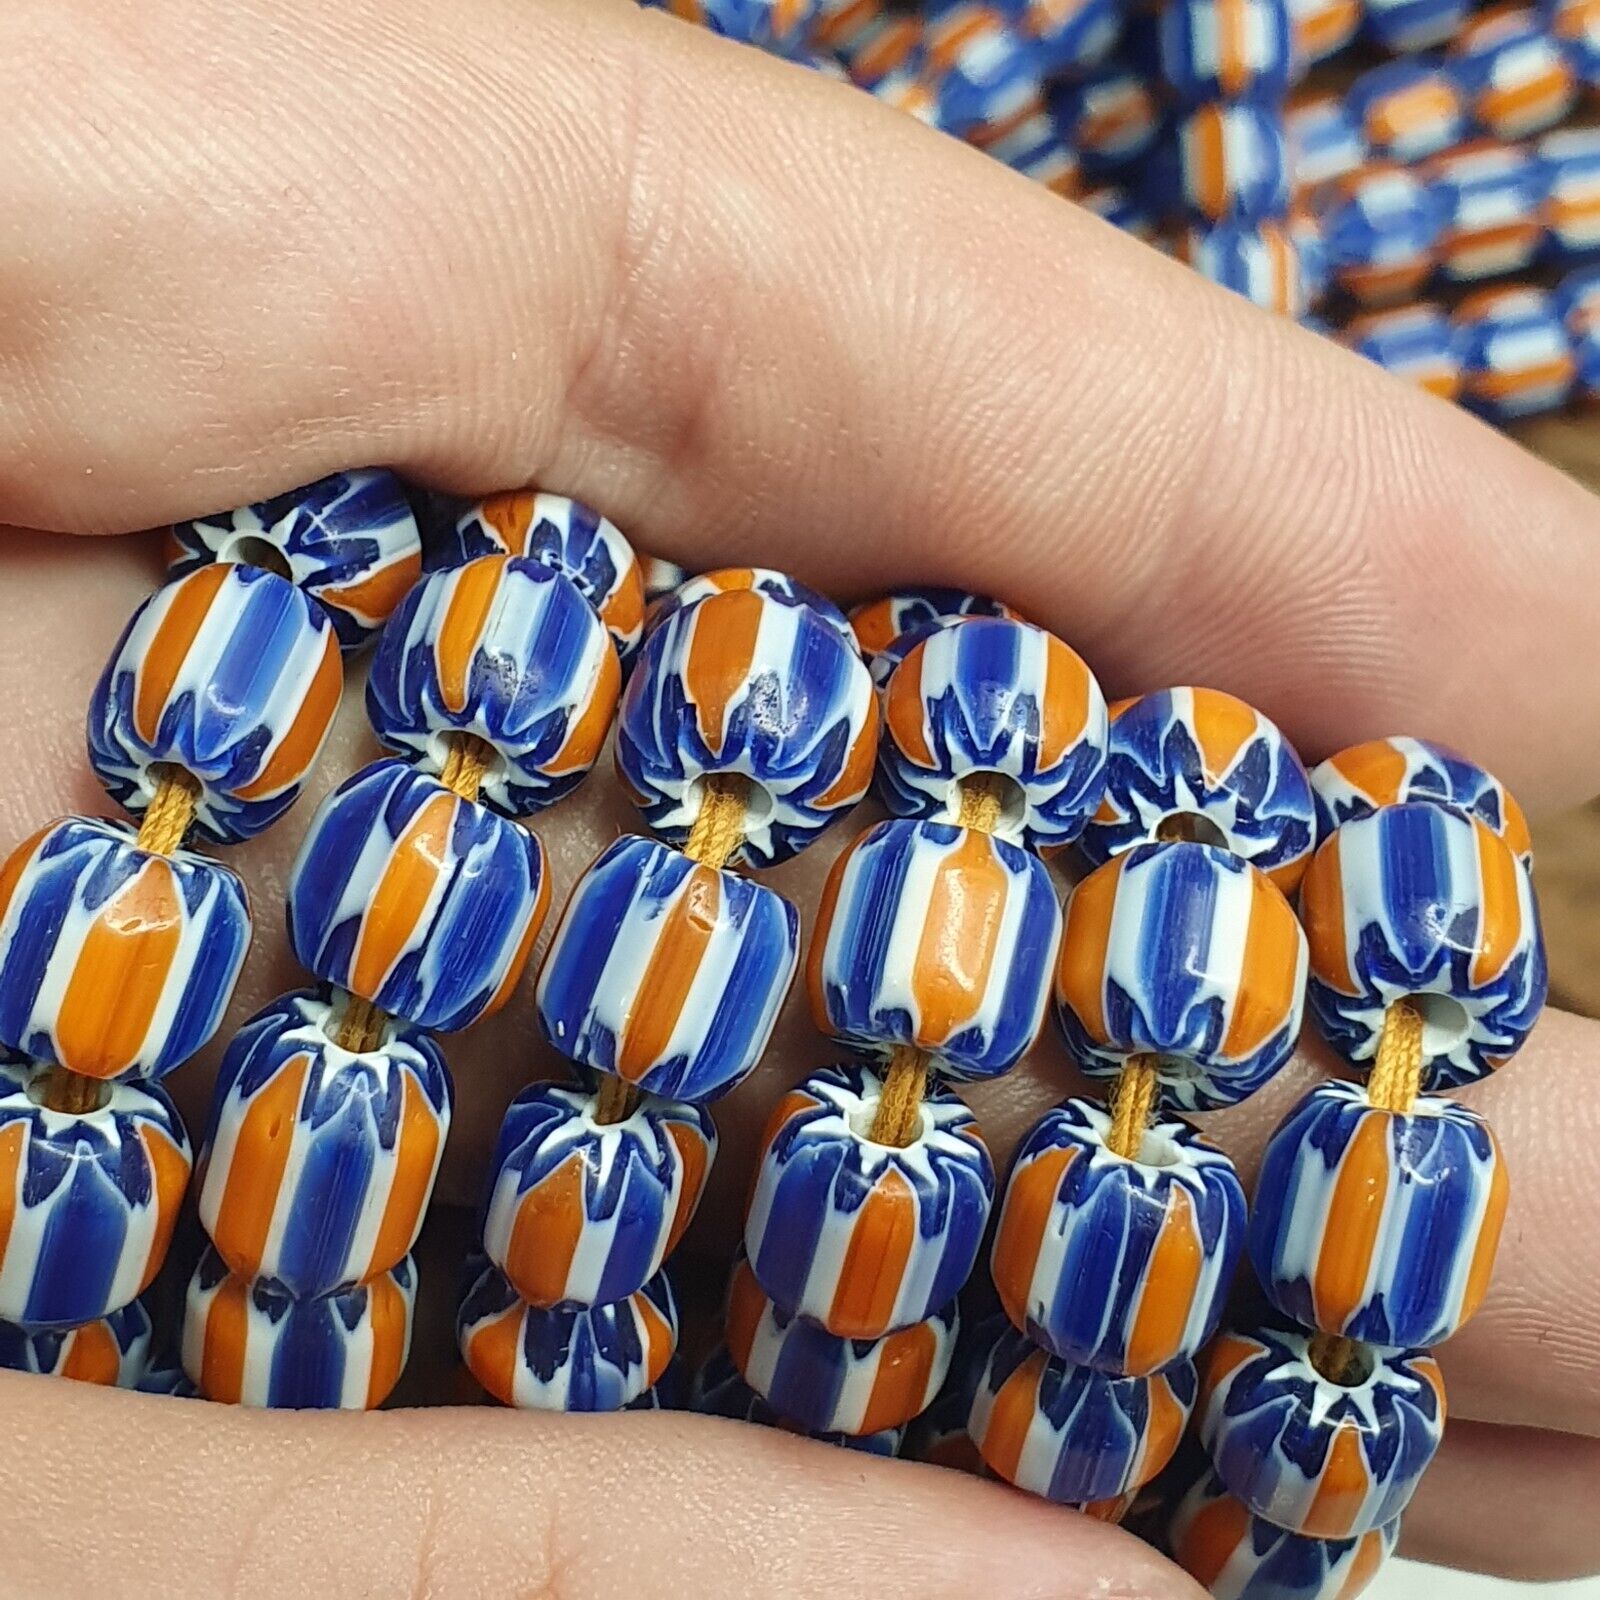 Vintage Venetian Style beads Old African Glass Chevron Beads Long Strand